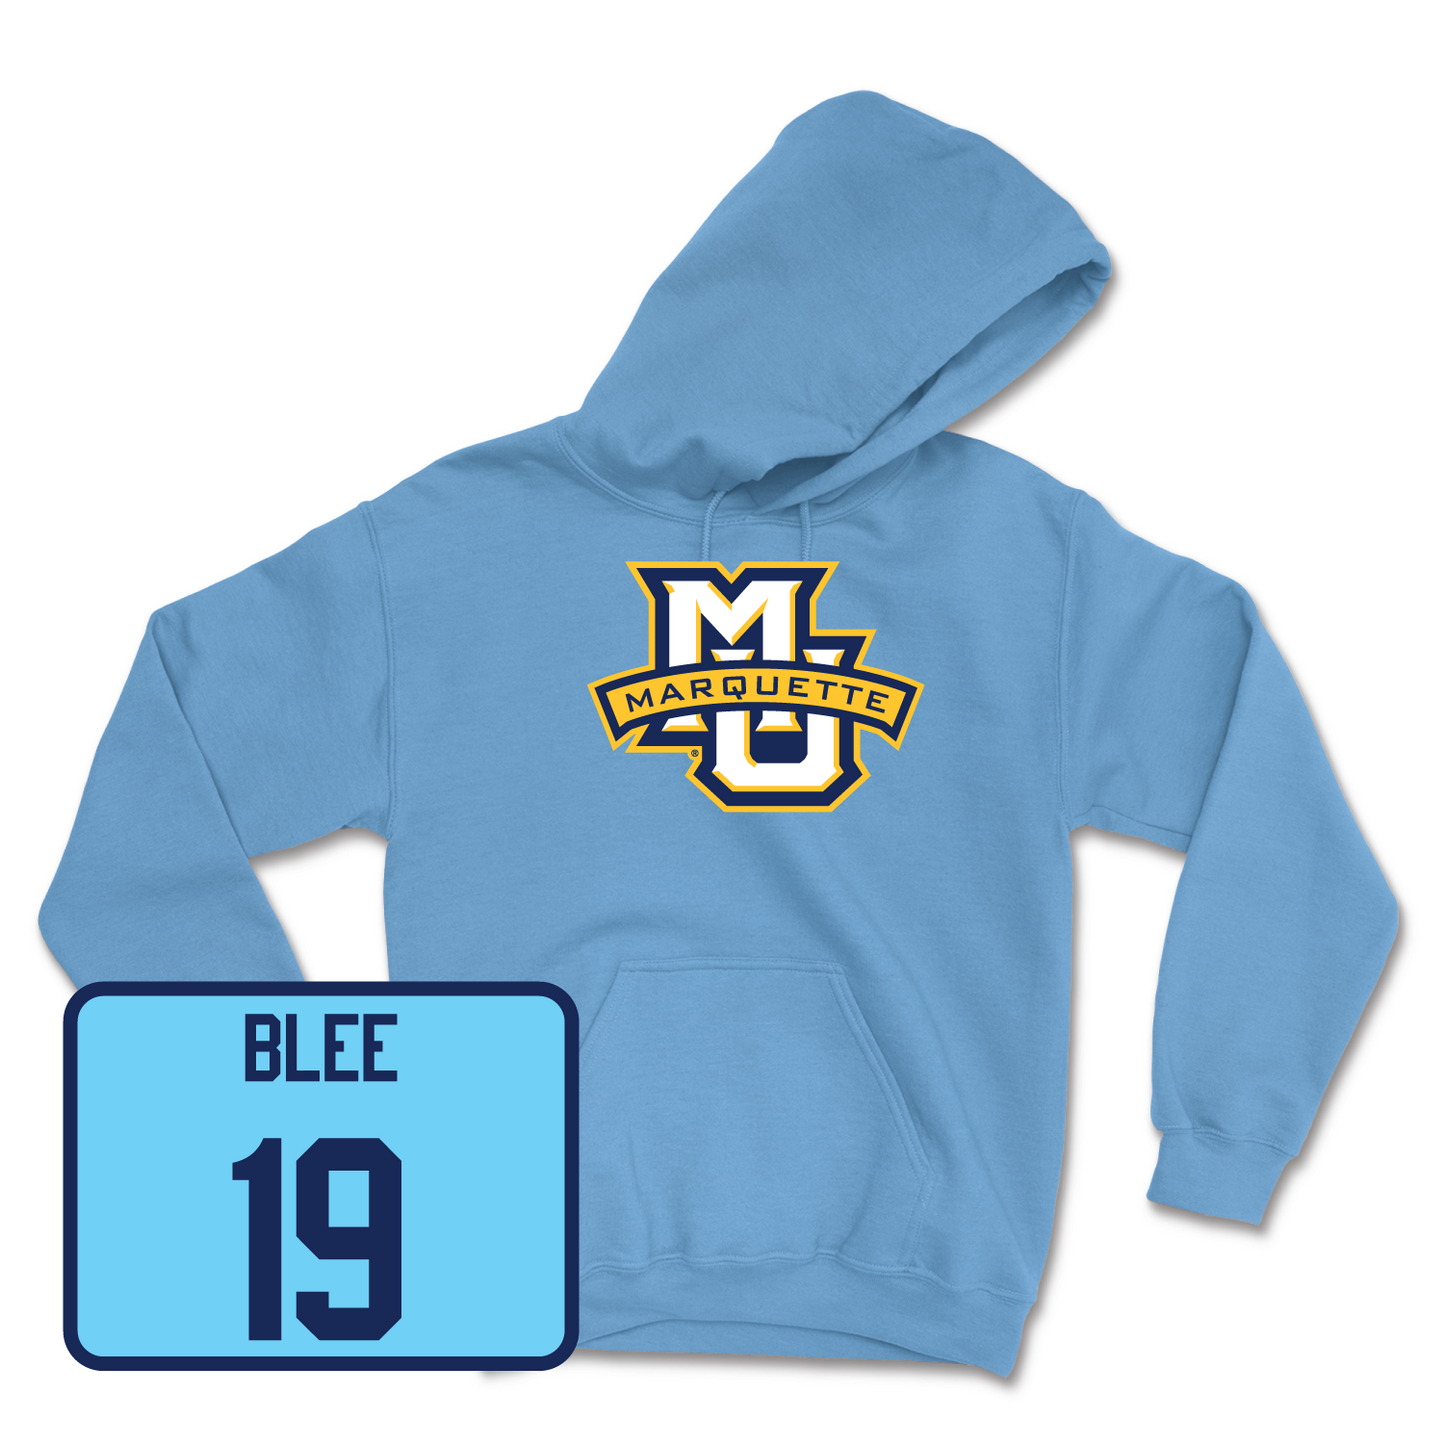 Championship Blue Women's Lacrosse Marquette Hoodie 2 Youth Small / Mary Blee | #19